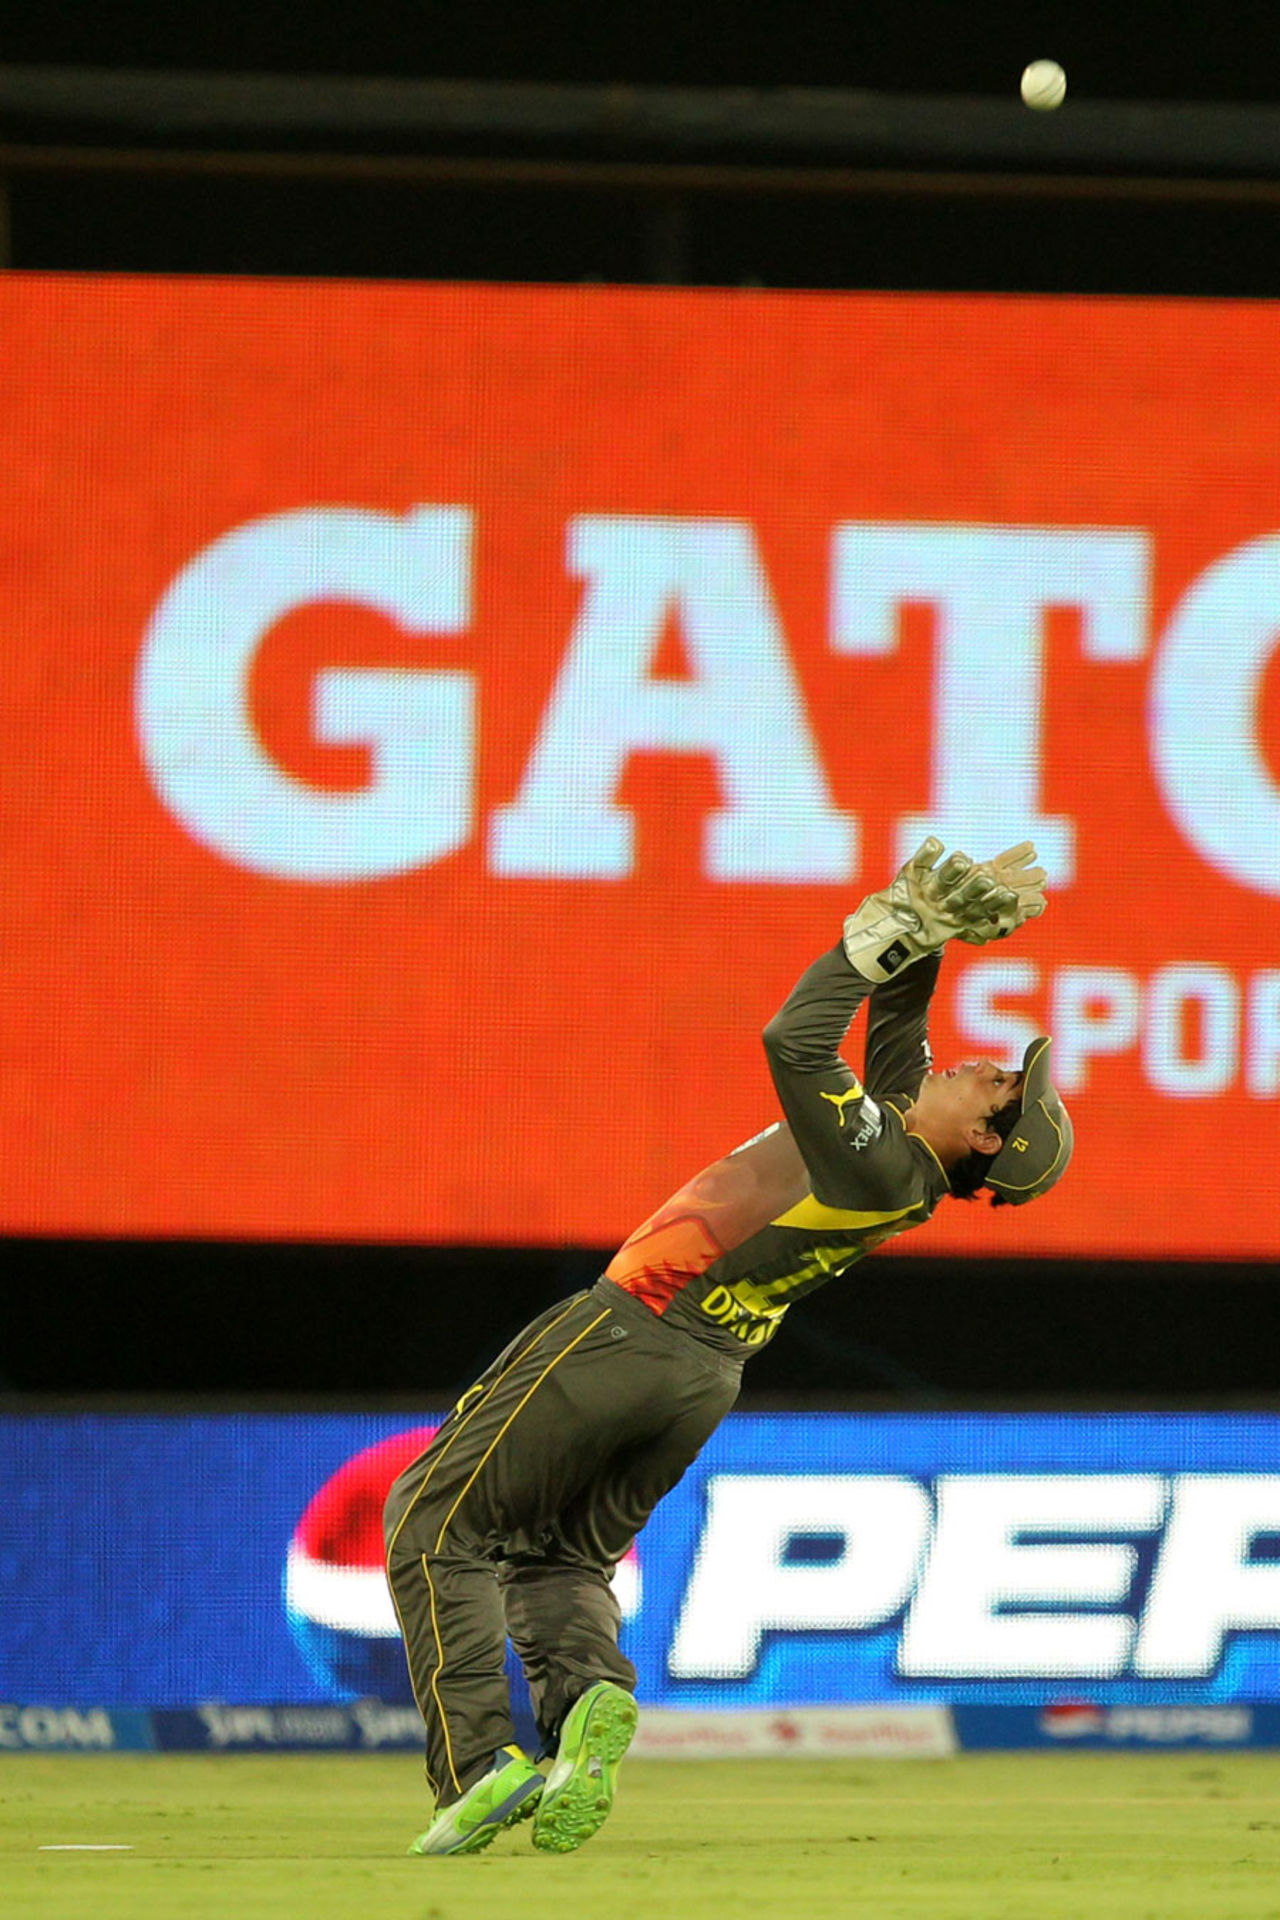 Quinton de Kock is poised to take a catch, Sunrisers Hyderabad v Kings XI Punjab, IPL, Hyderabad, April 19, 2013